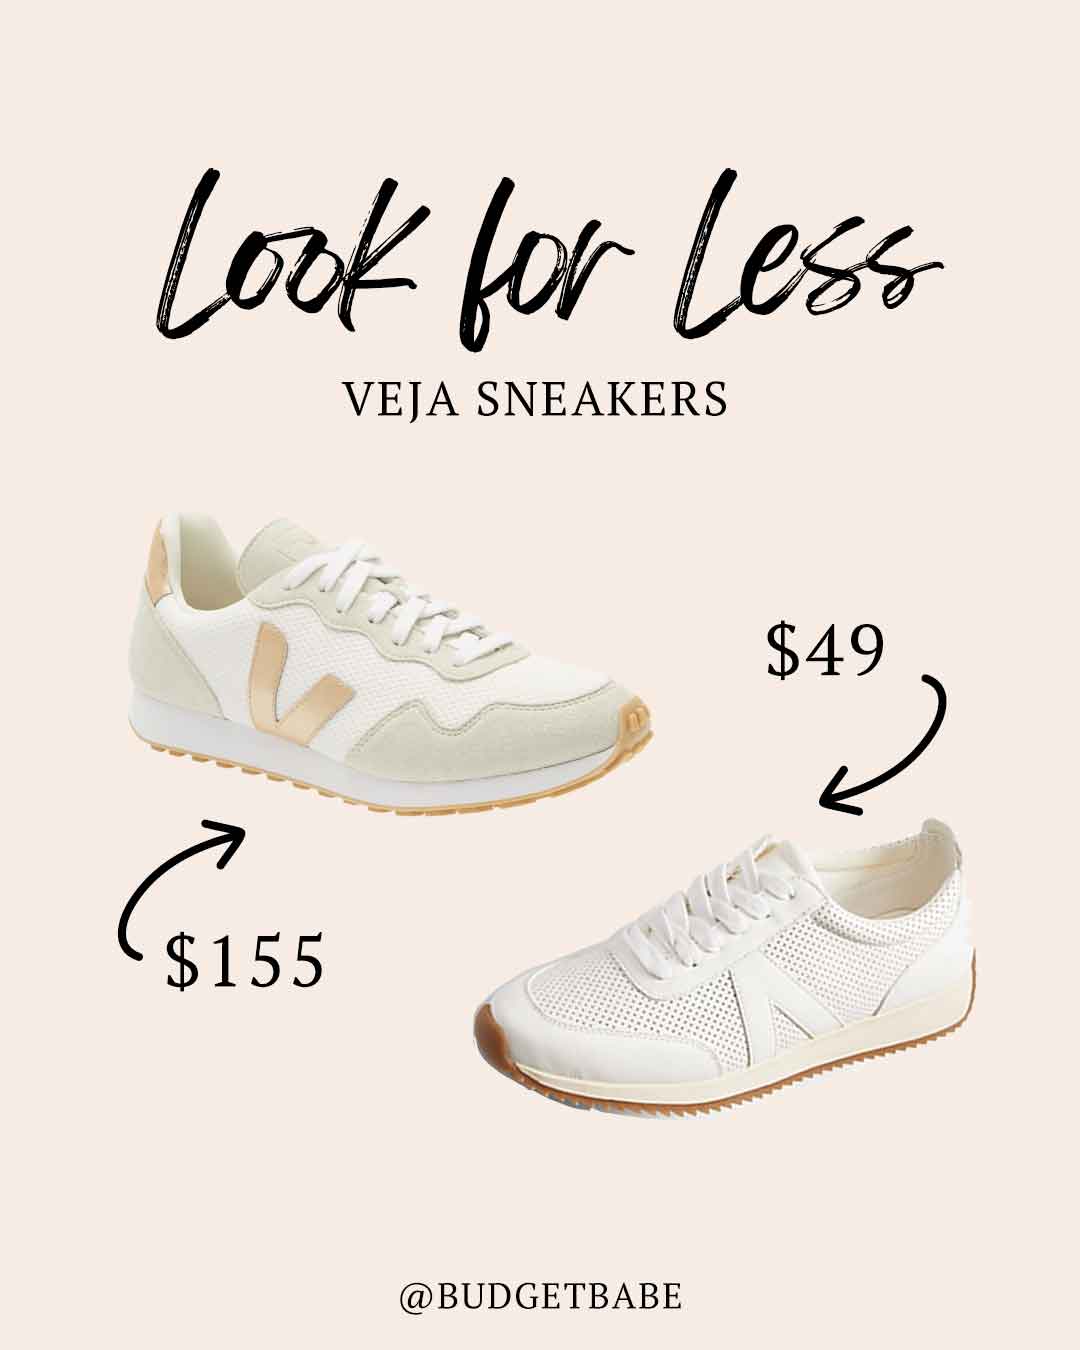 Veja Sneakers Look for Less